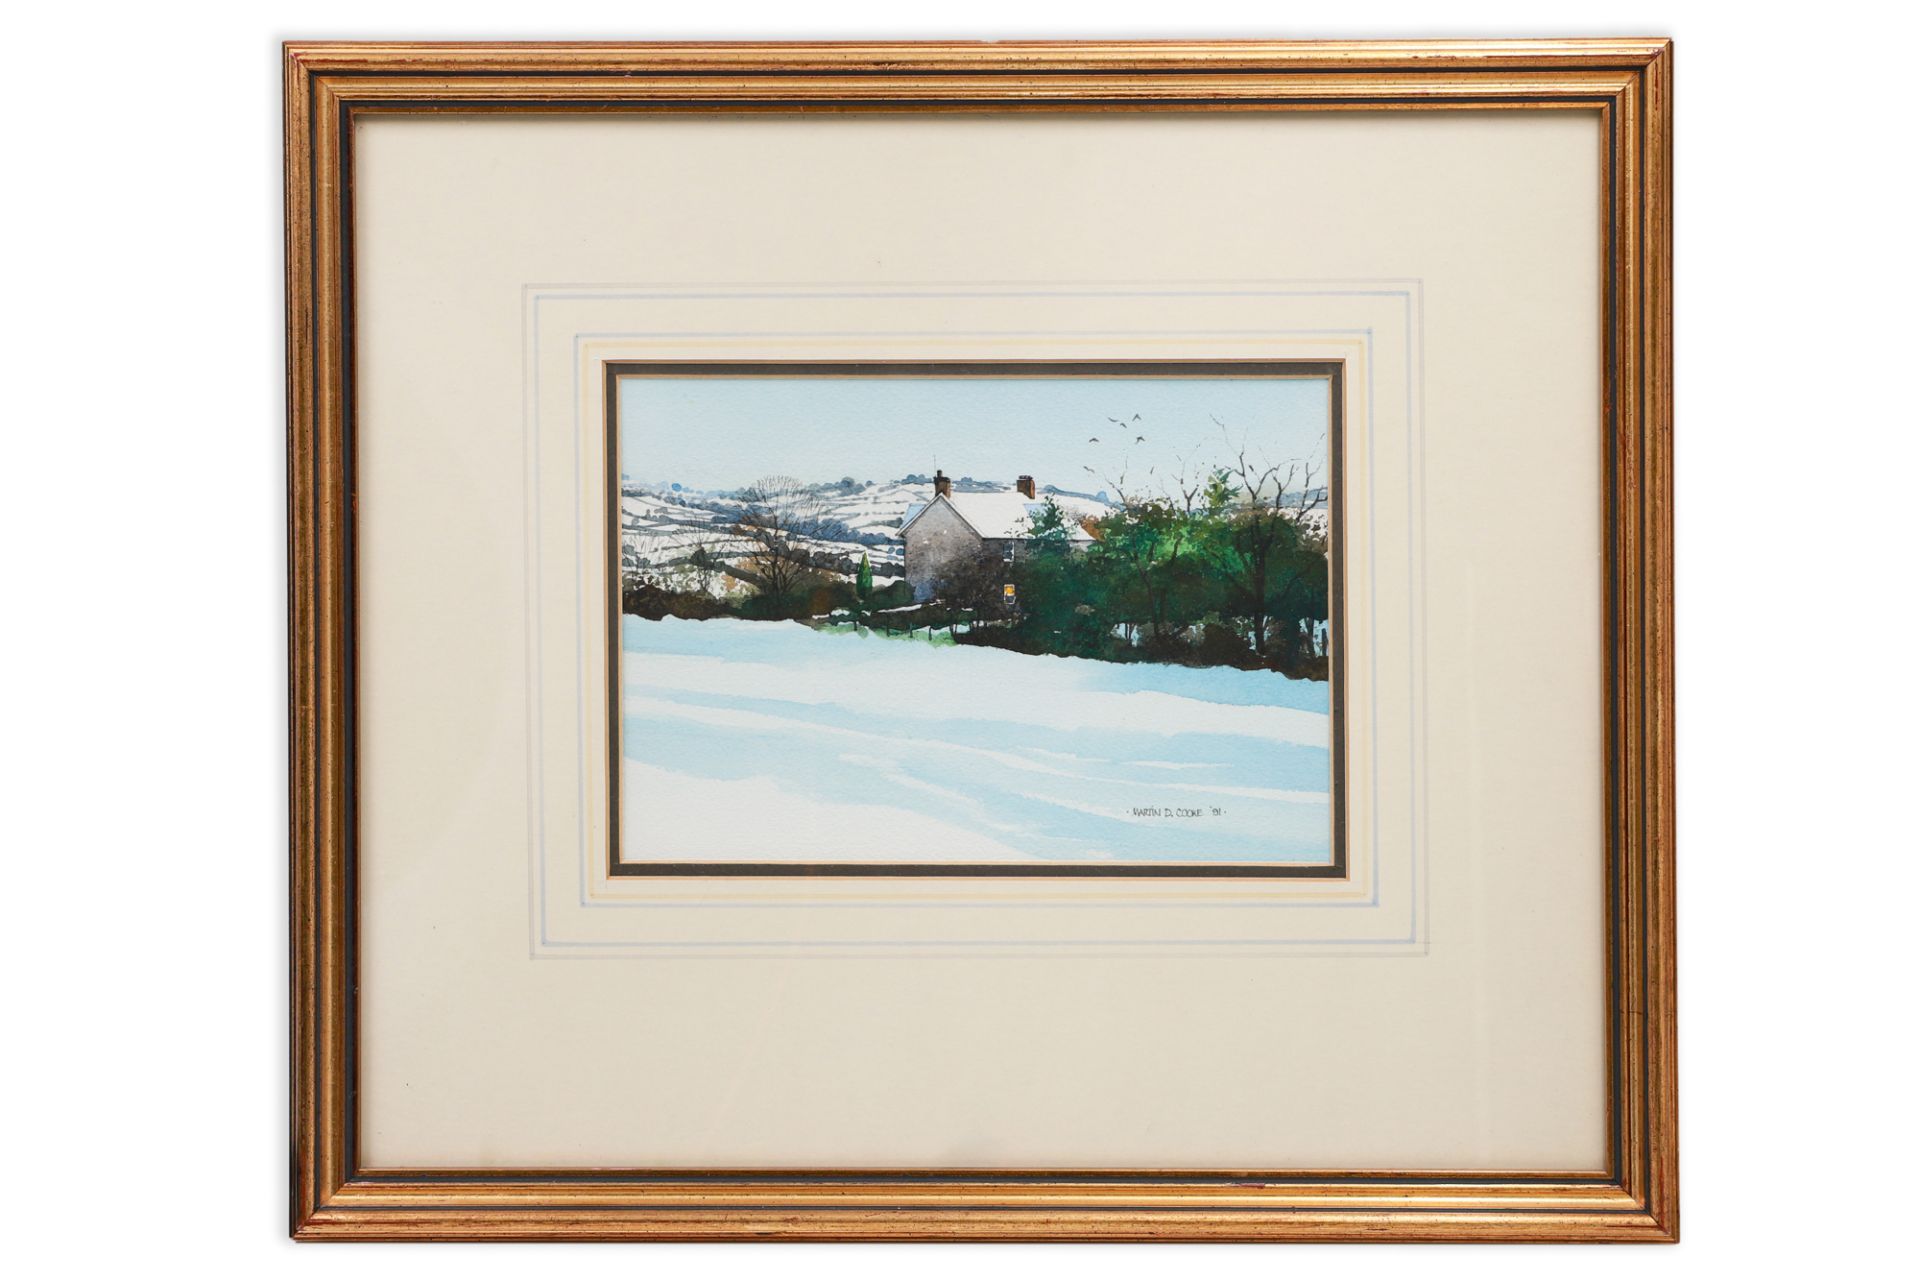 MARTIN D. COOKE (N. IRISH Contemporary), 'In the Castlereagh Hills', watercolour, signed and